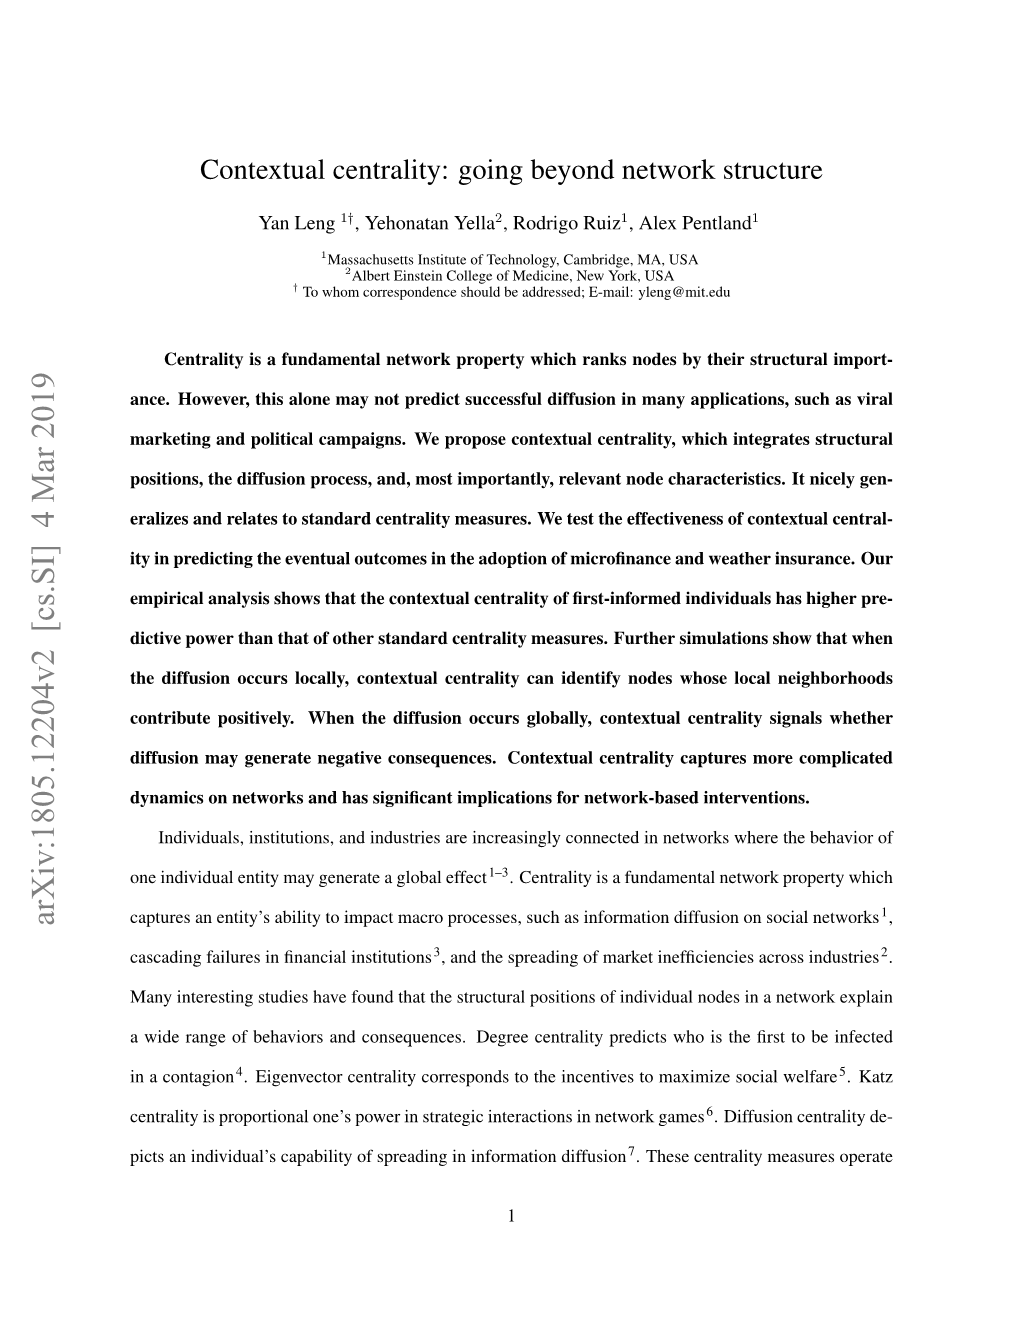 Contextual Centrality: Going Beyond Network Structure